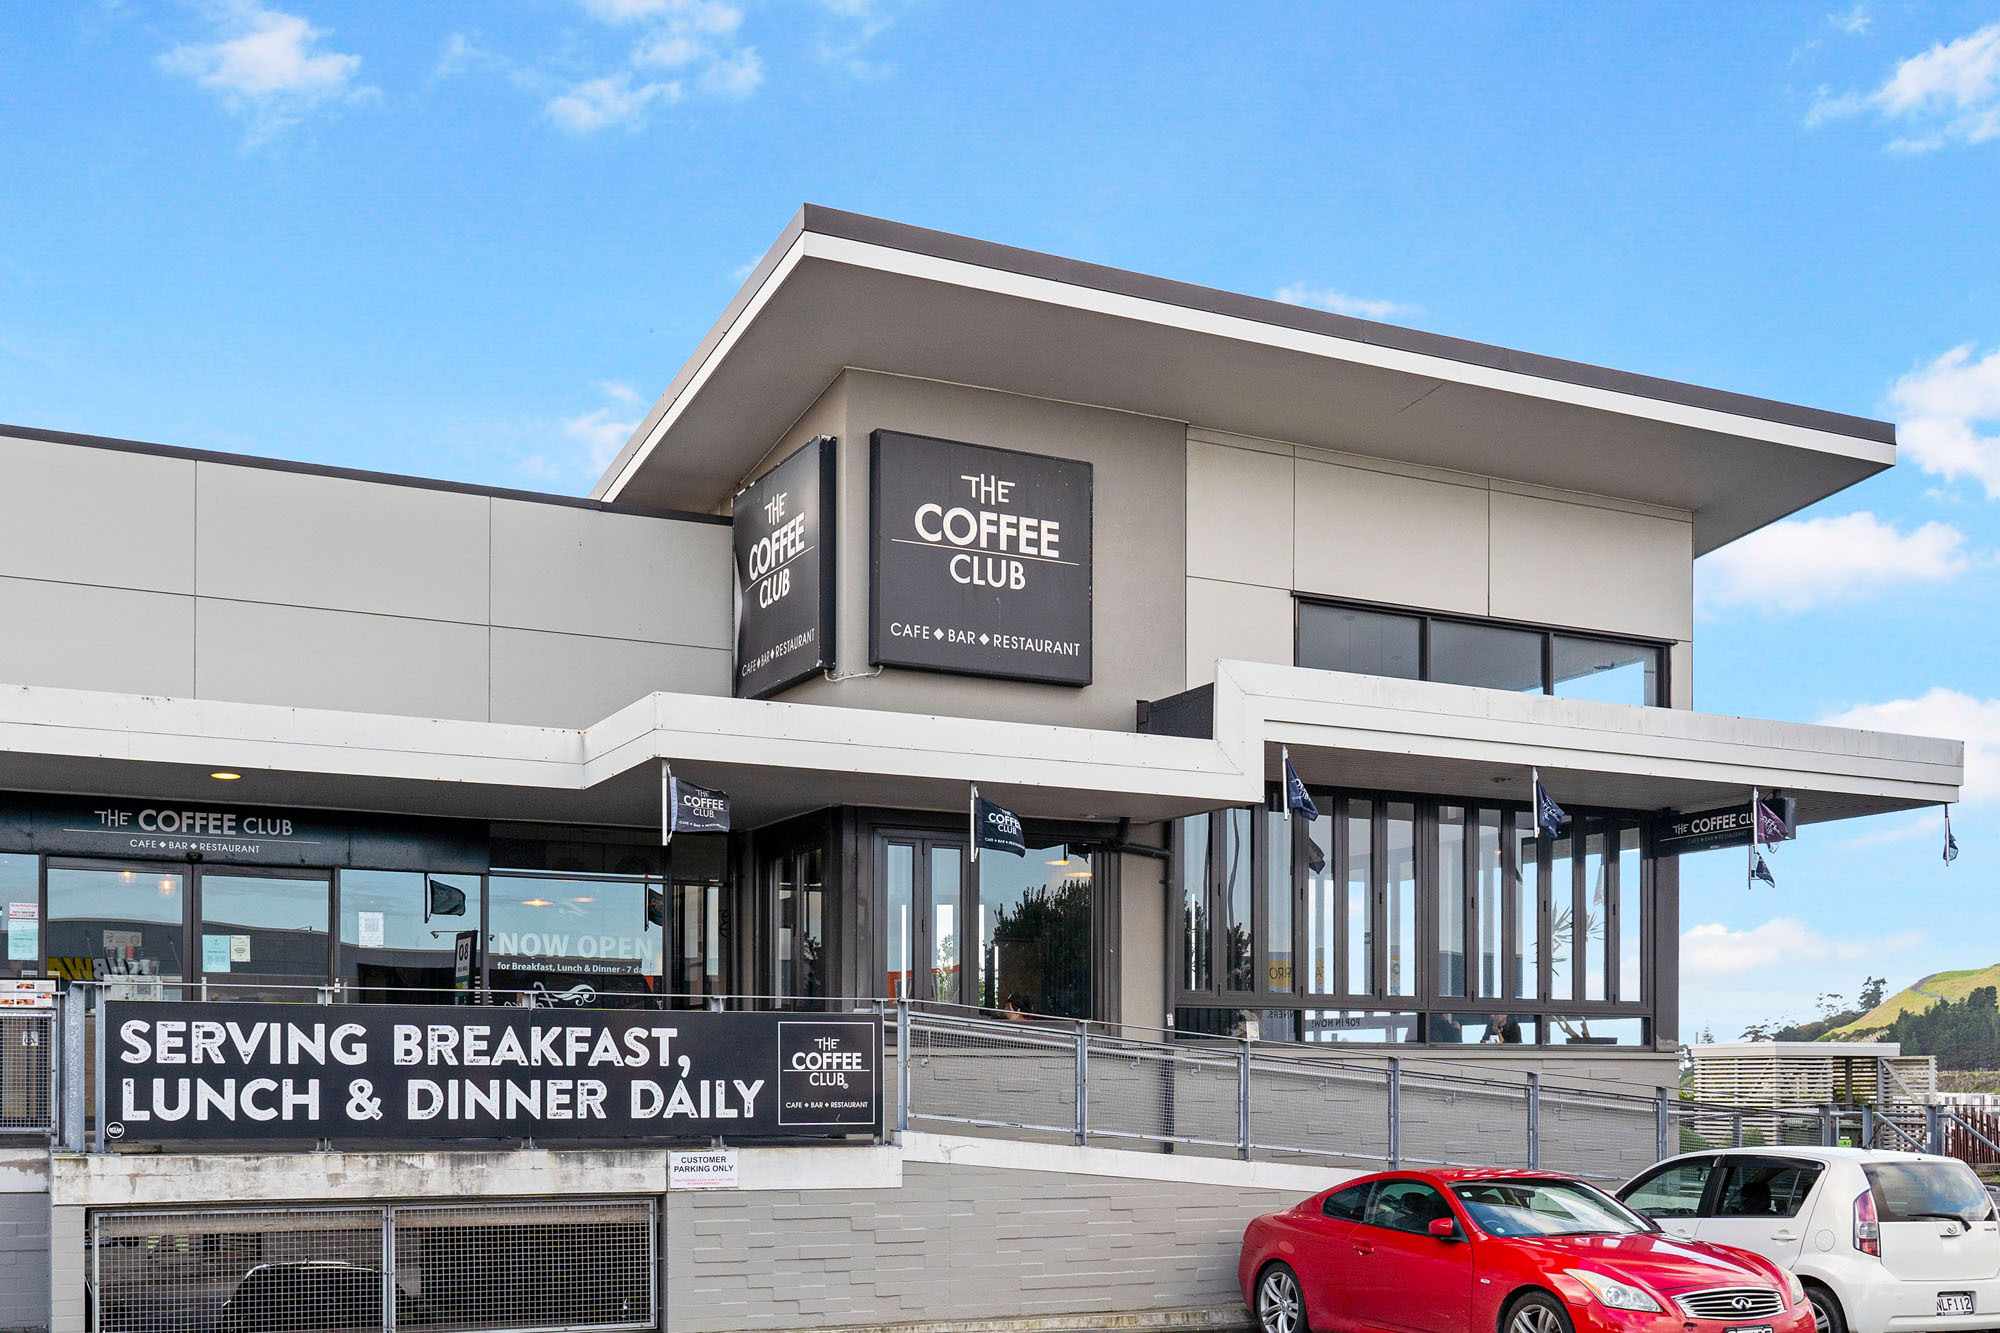 SOLD: The Magnificent Coffee Club on Lunn Ave | Kakapo